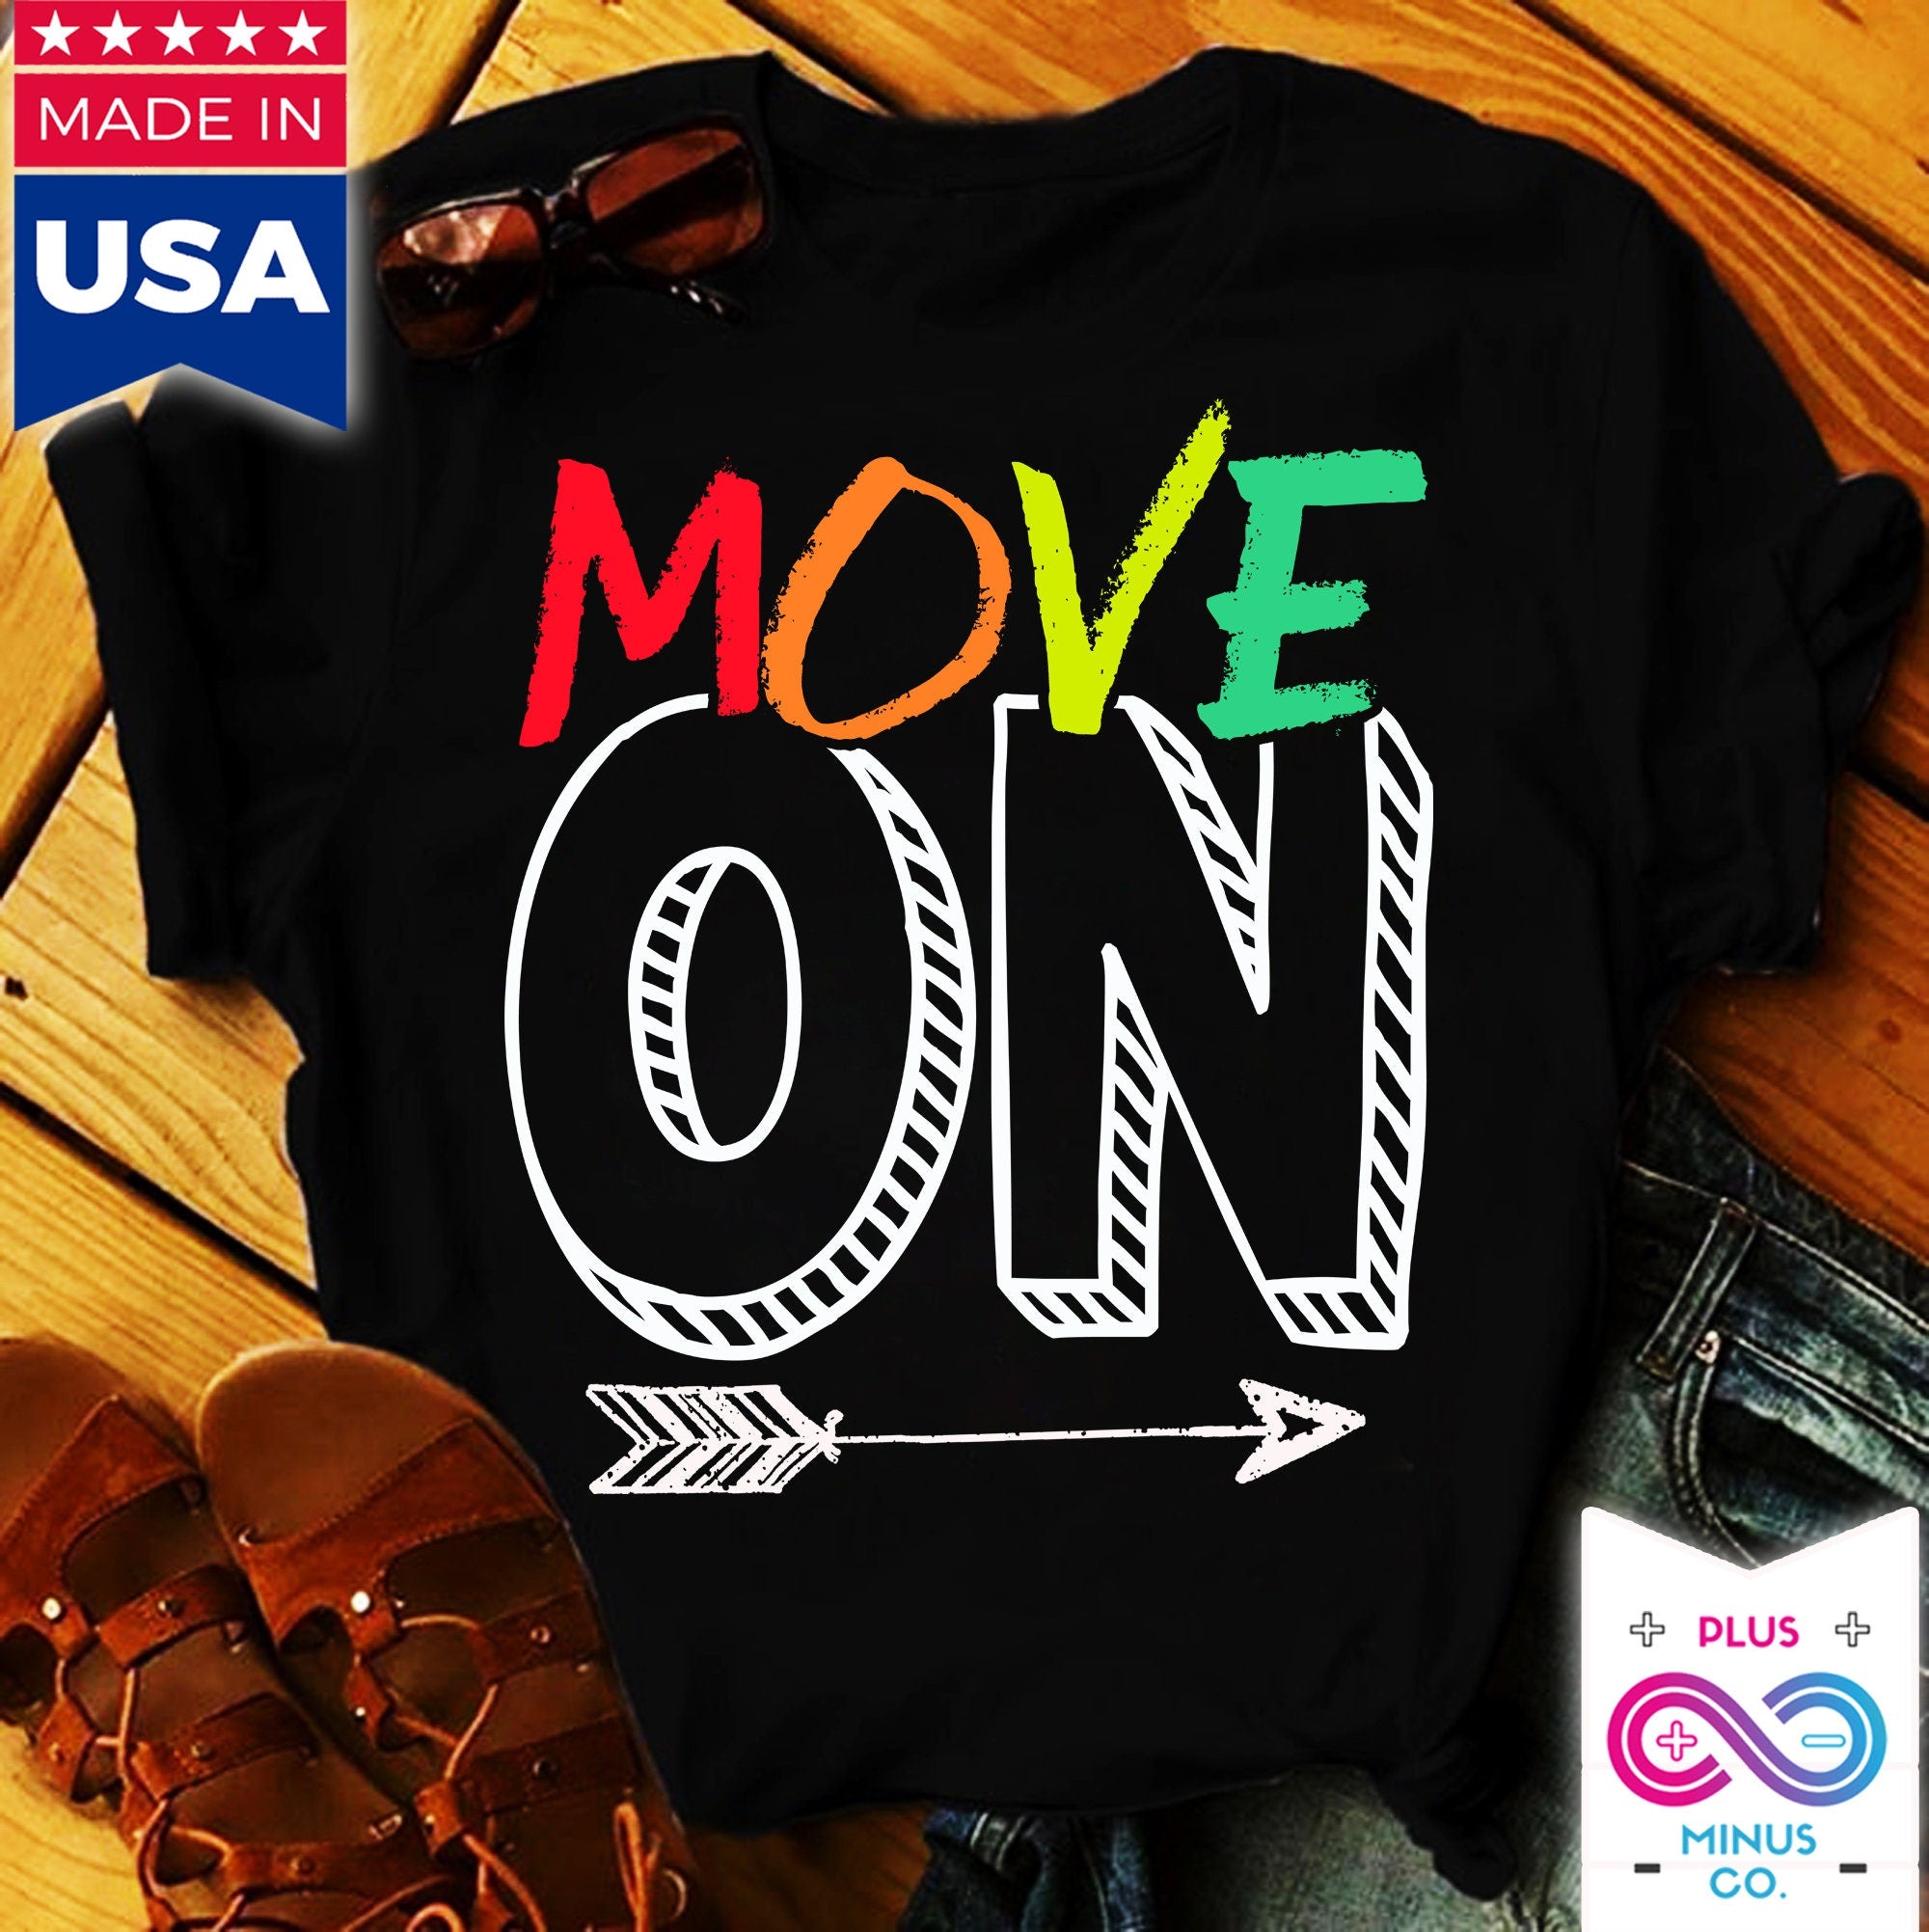 Move On T-Shirts, Move On Shirt, Shirts with Sayings, Funny Quote Shirt, Motivational Shirt, Inspirational Tee Shirt, Positivity, Moving On - plusminusco.com